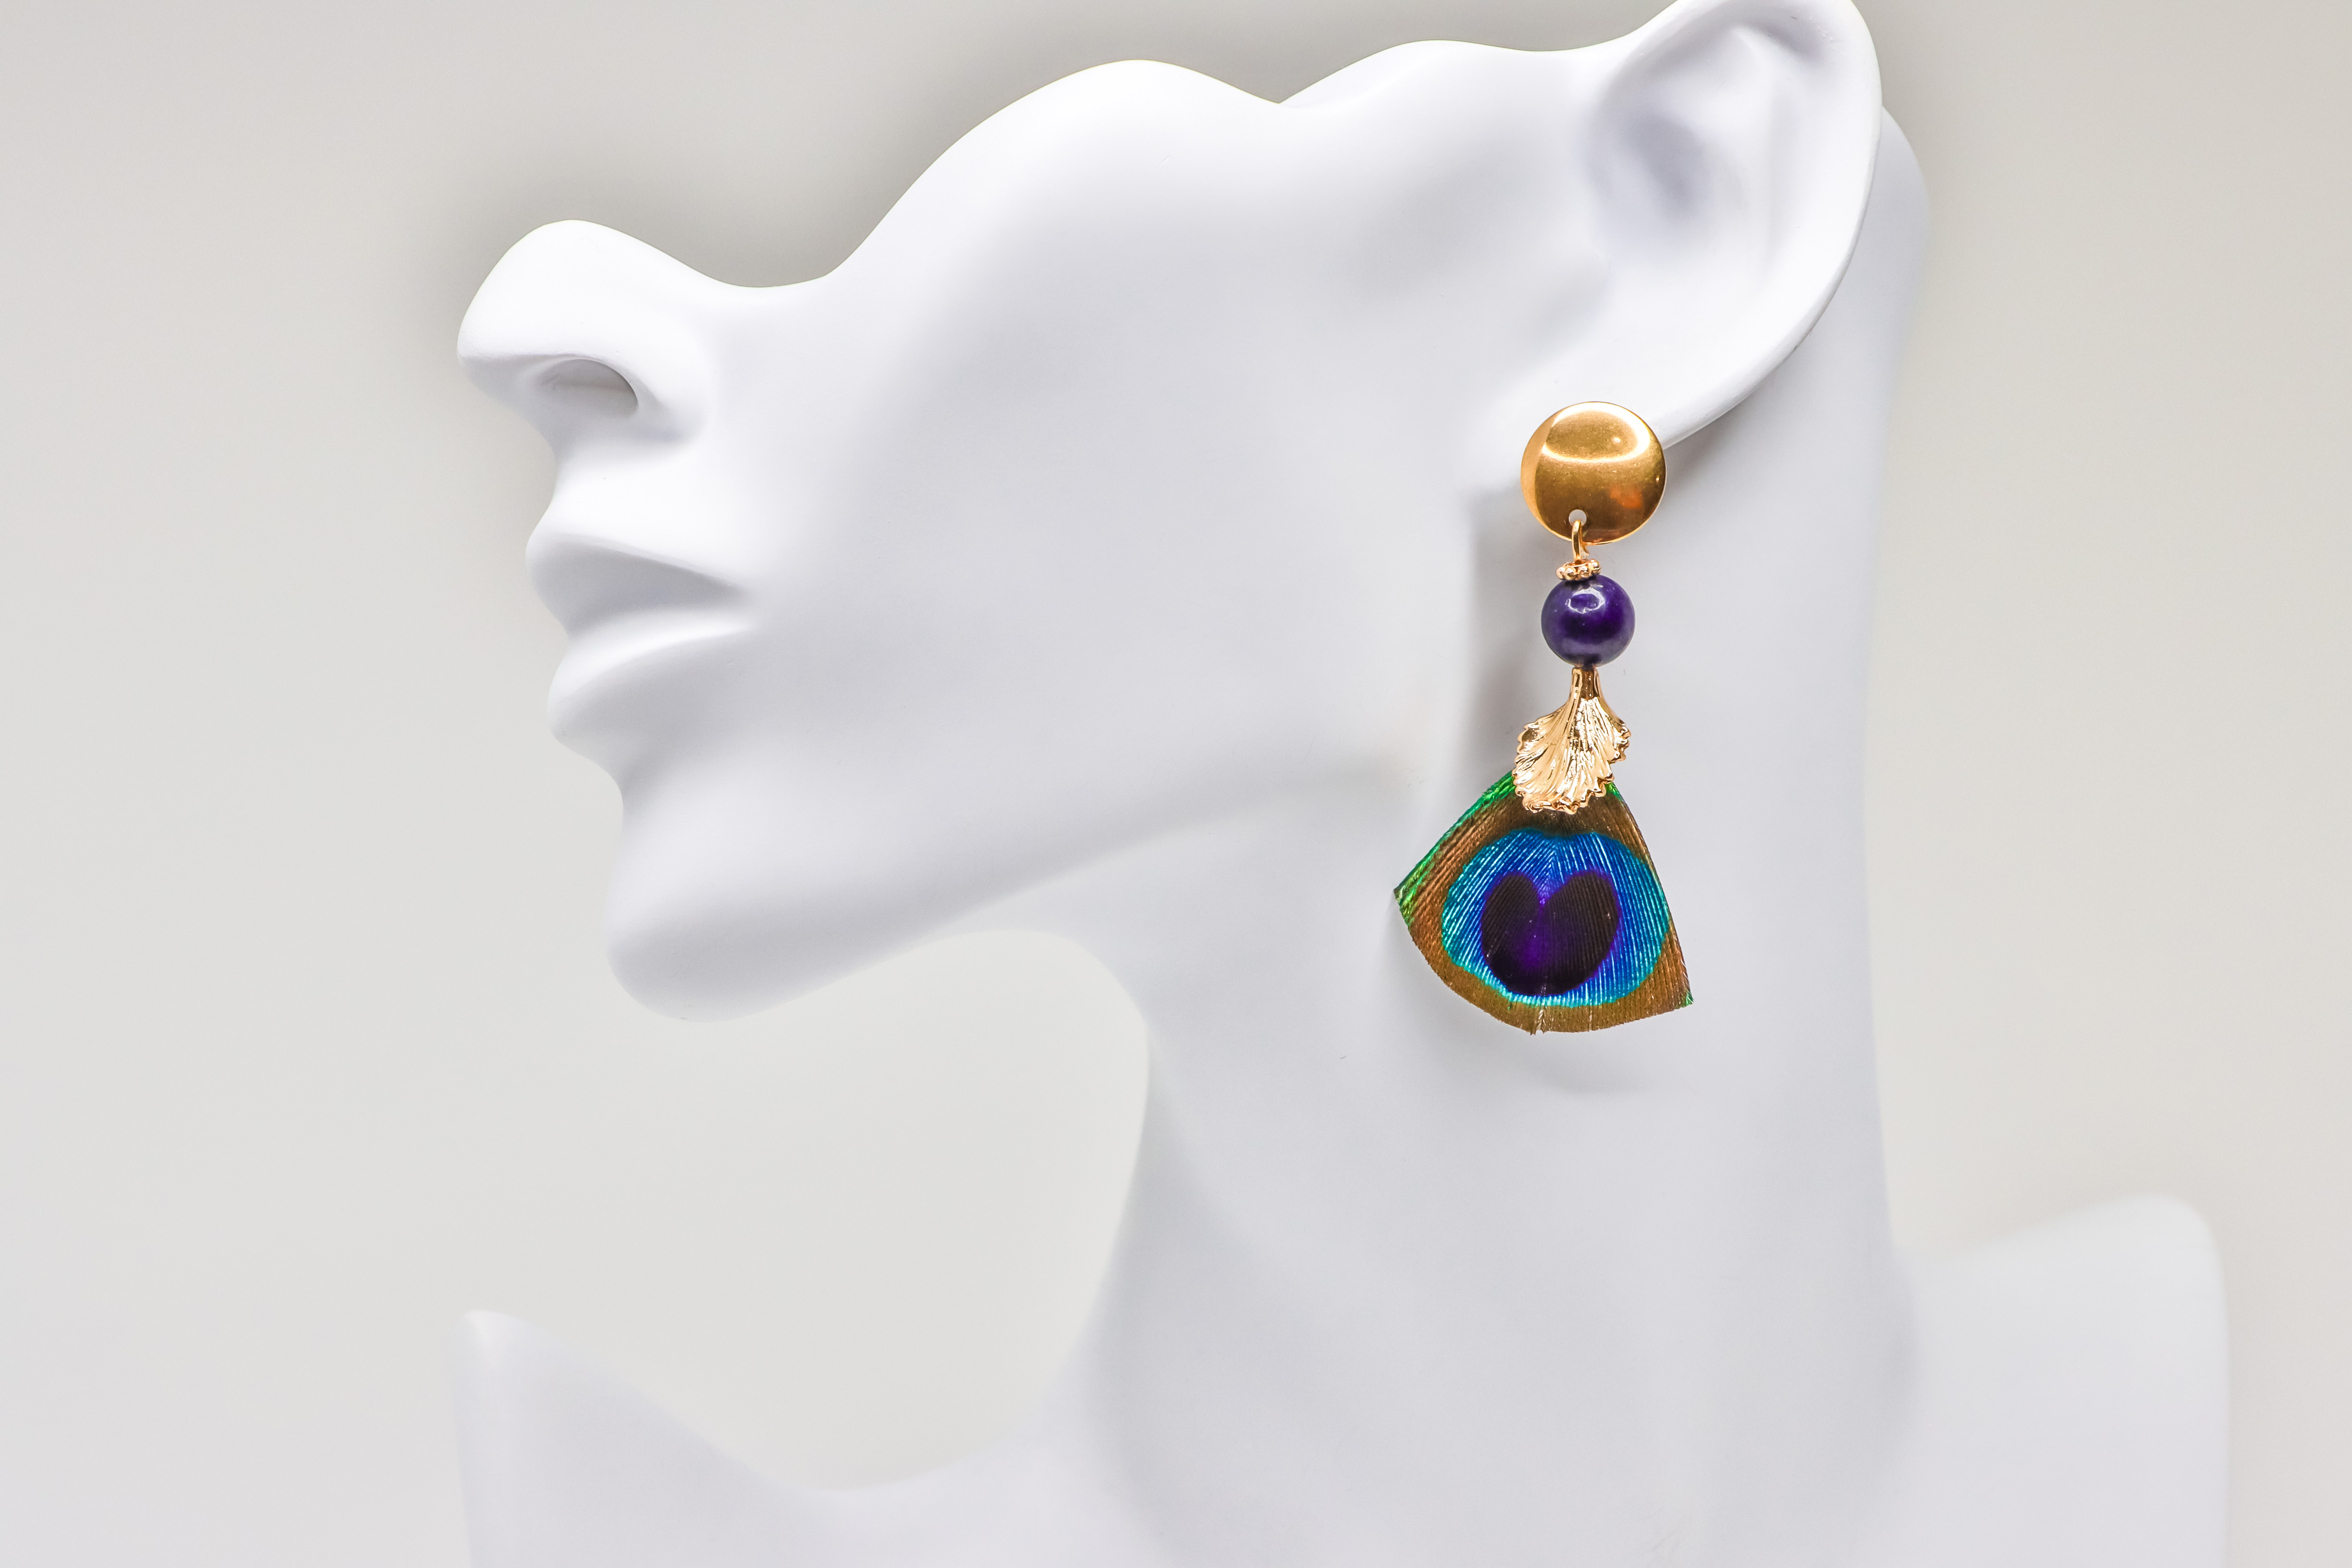 Gold Earrings - Peacock and Gold Collection 1